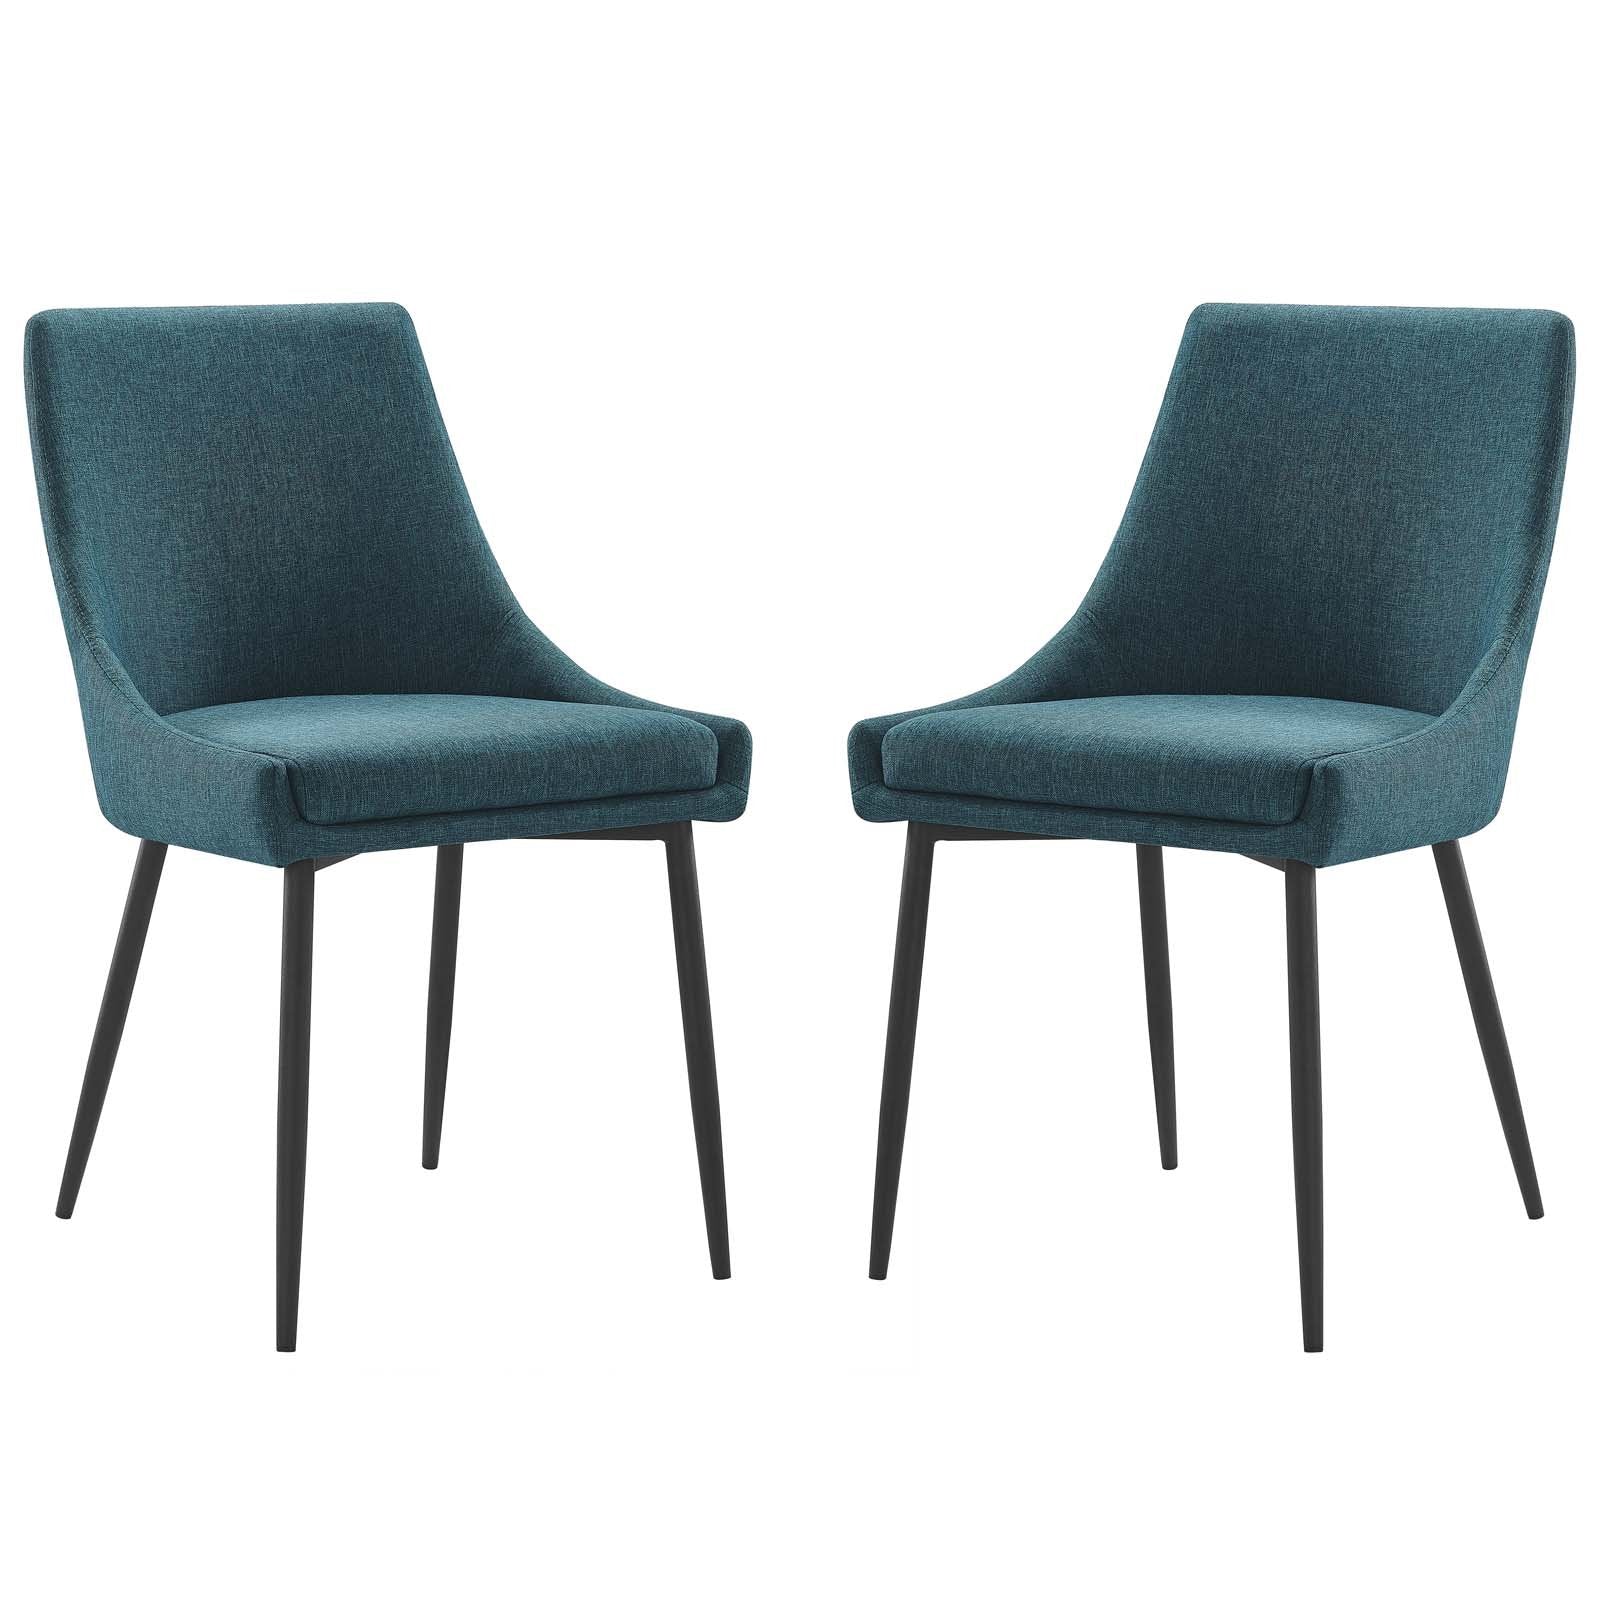 Viscount Upholstered Fabric Dining Chairs - Set of 2